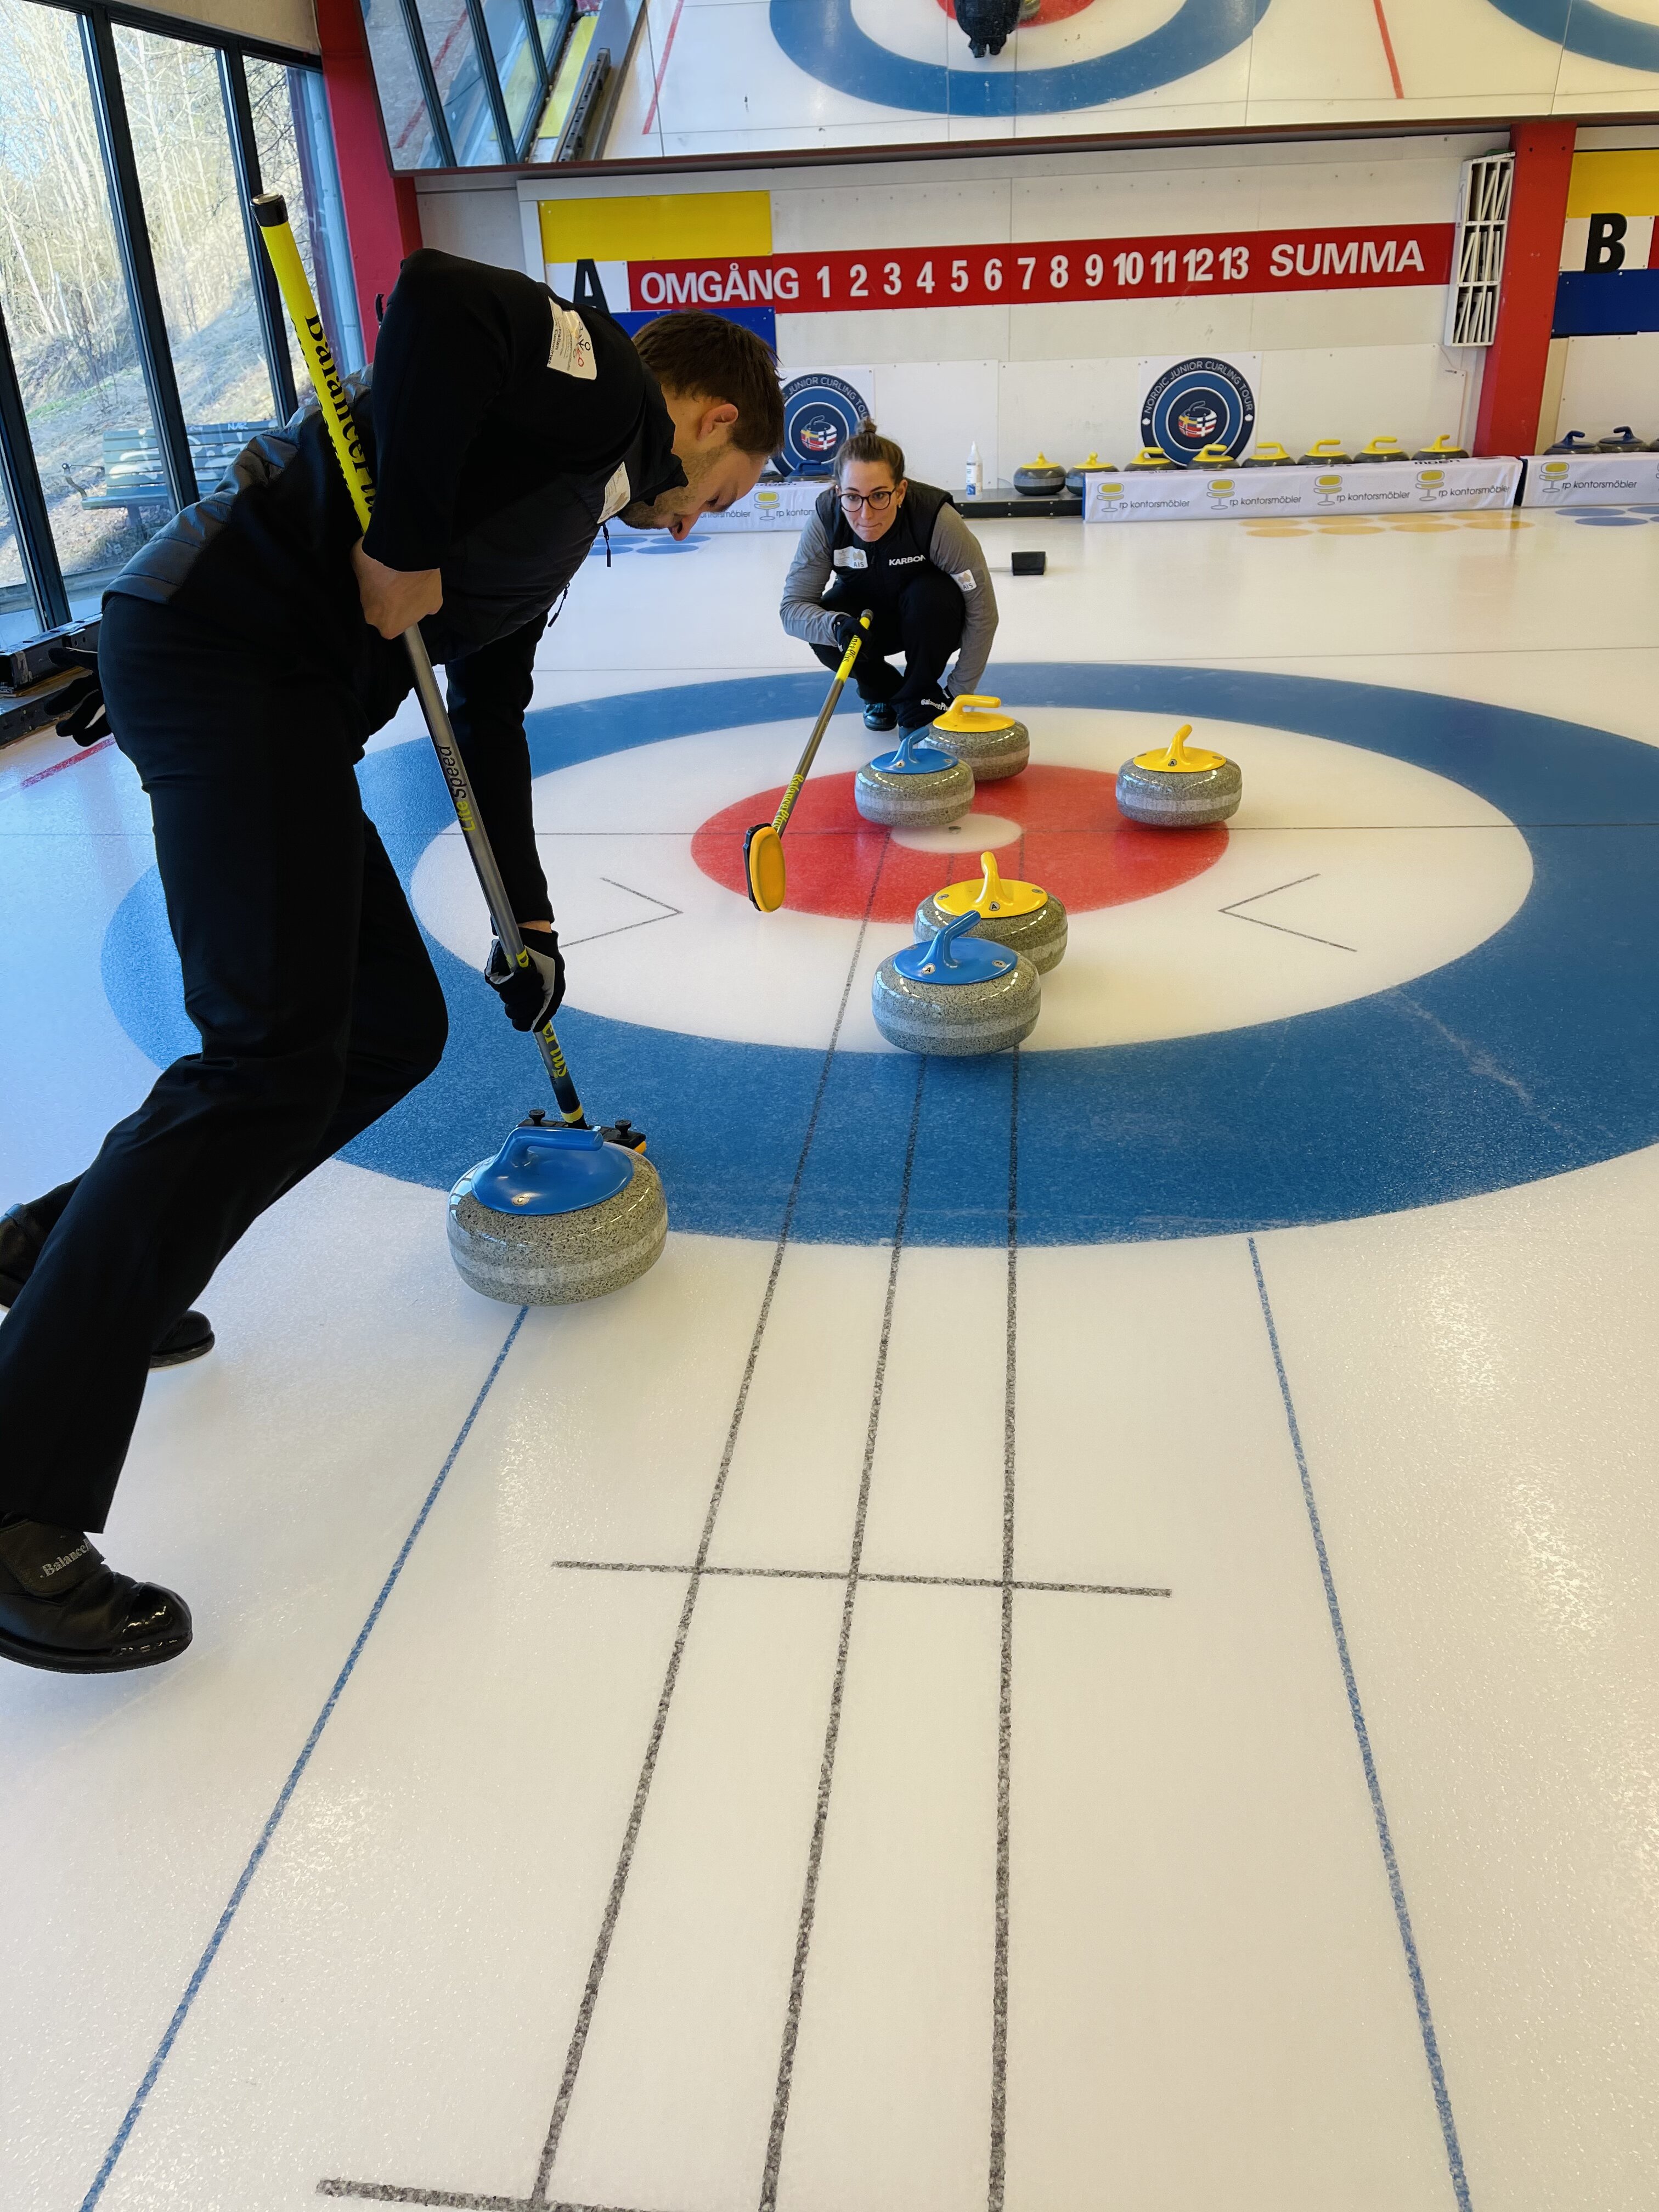 Dean and Tahli training on curling ice